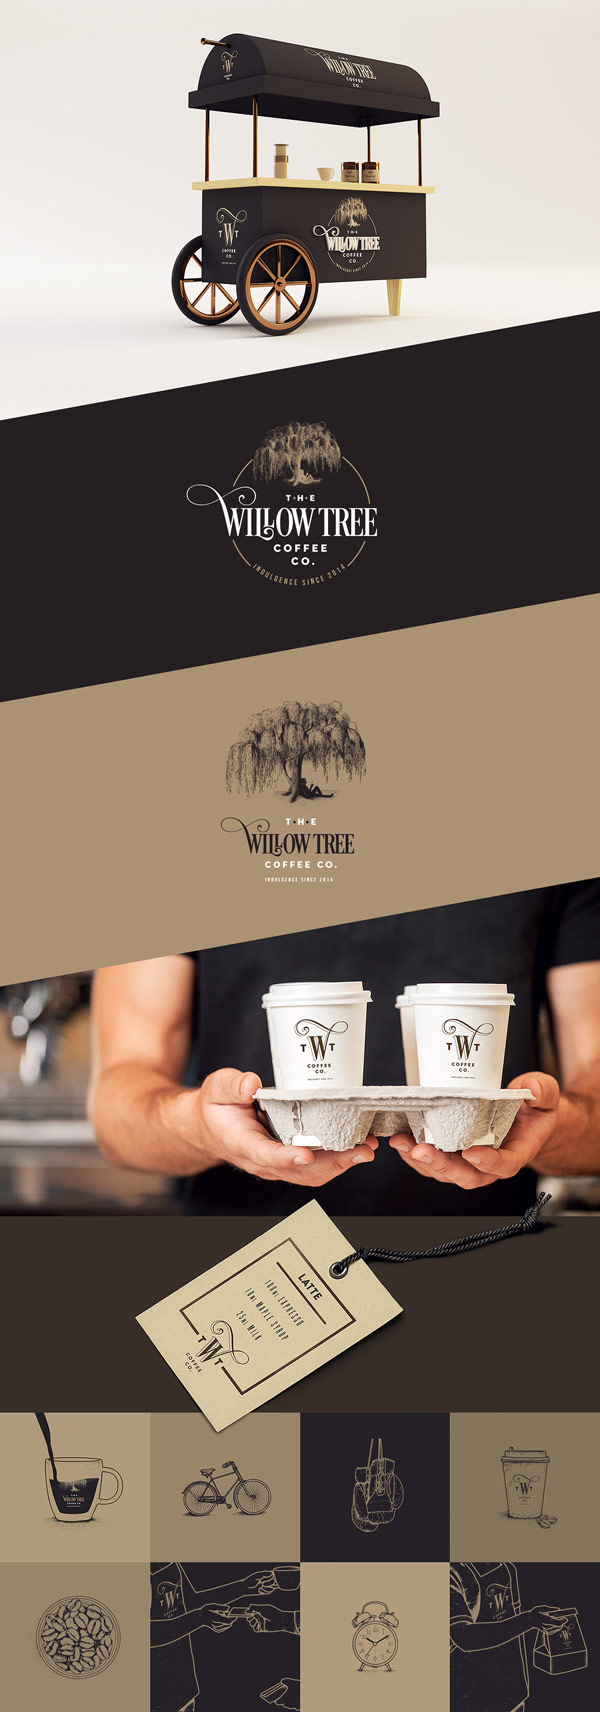 The sophisticated brand identity provides a taste of the high quality Brazilian coffee.